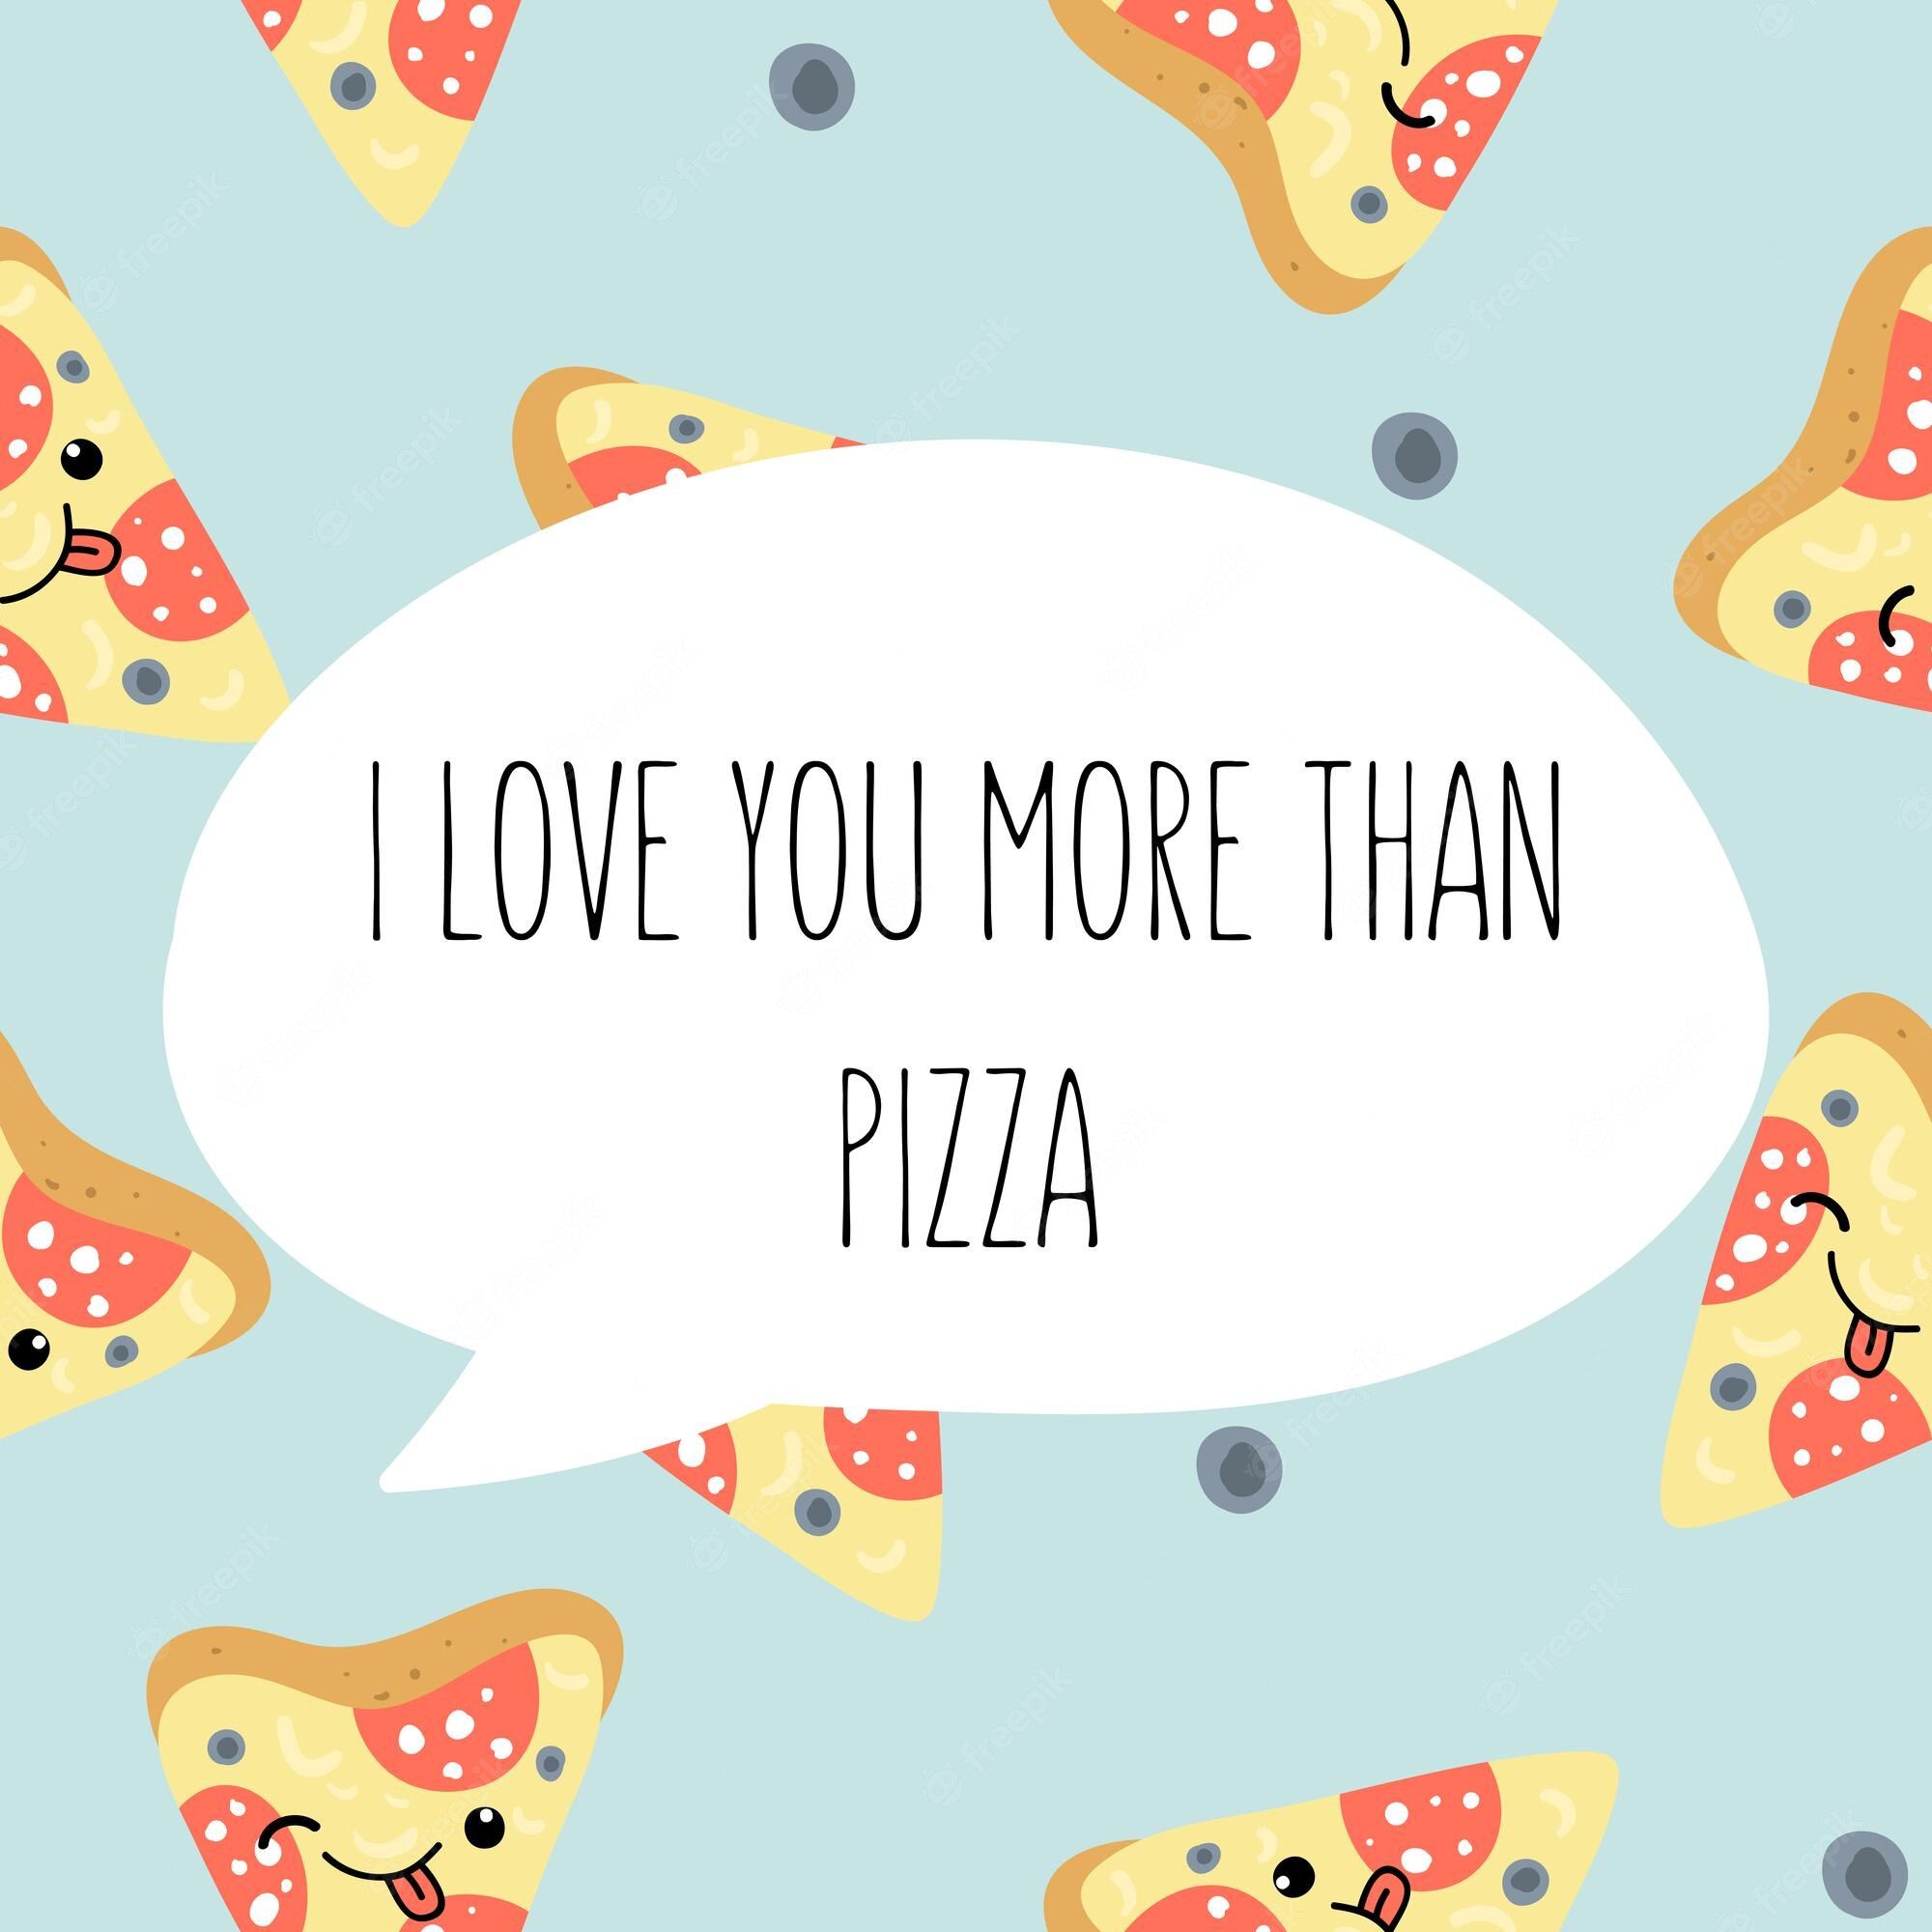 I love you more than pizza - Pizza